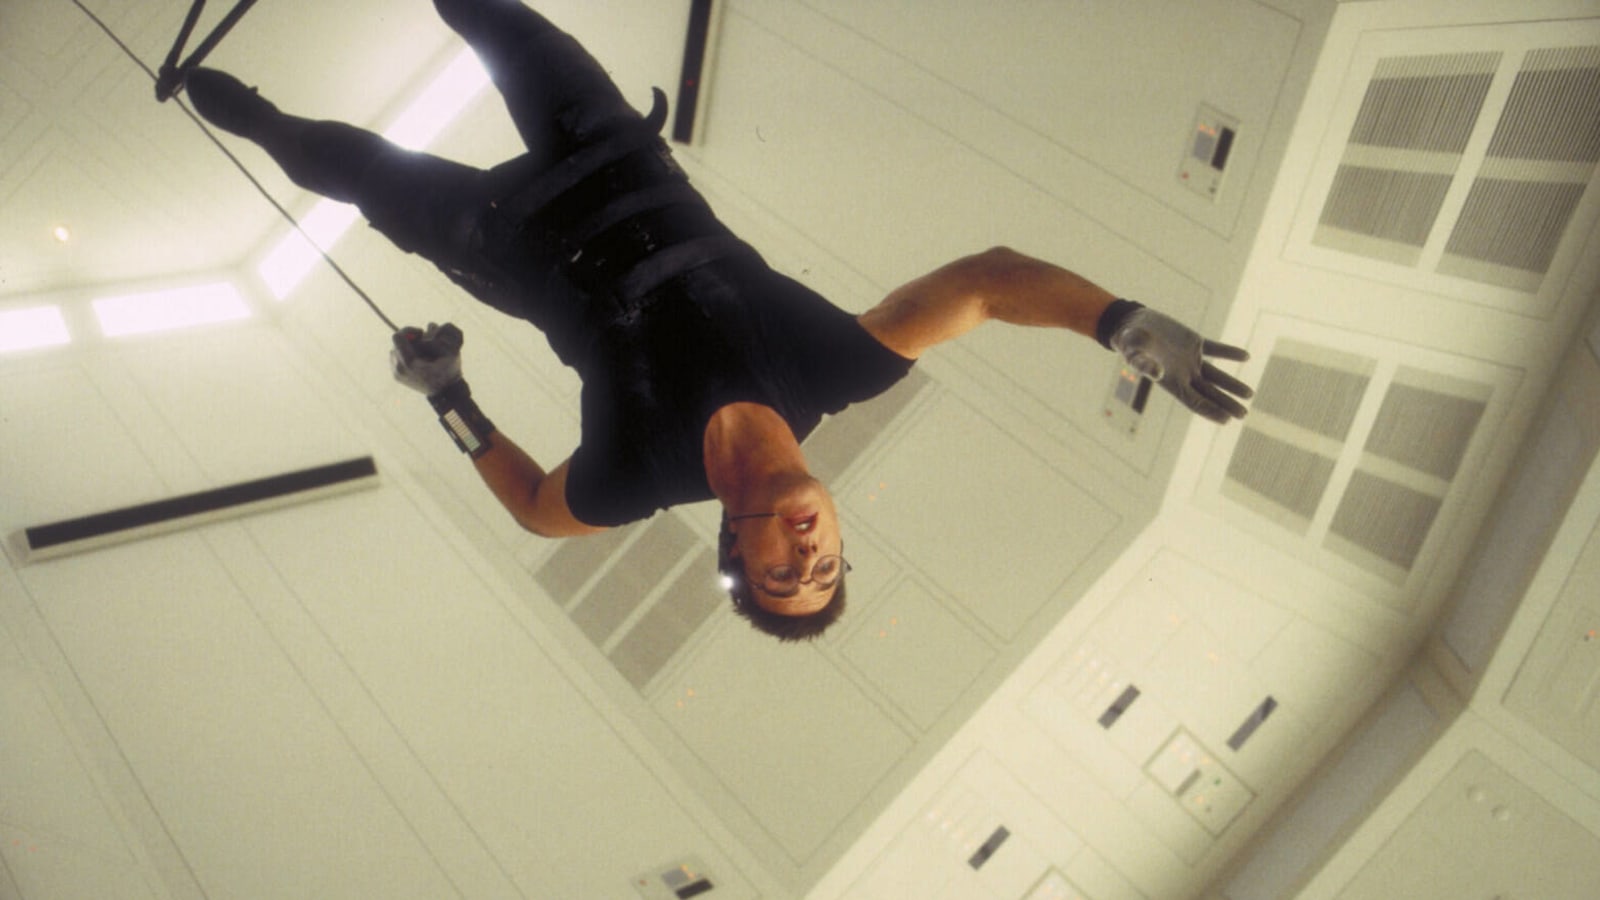 20 facts you might not know about 'Mission: Impossible'